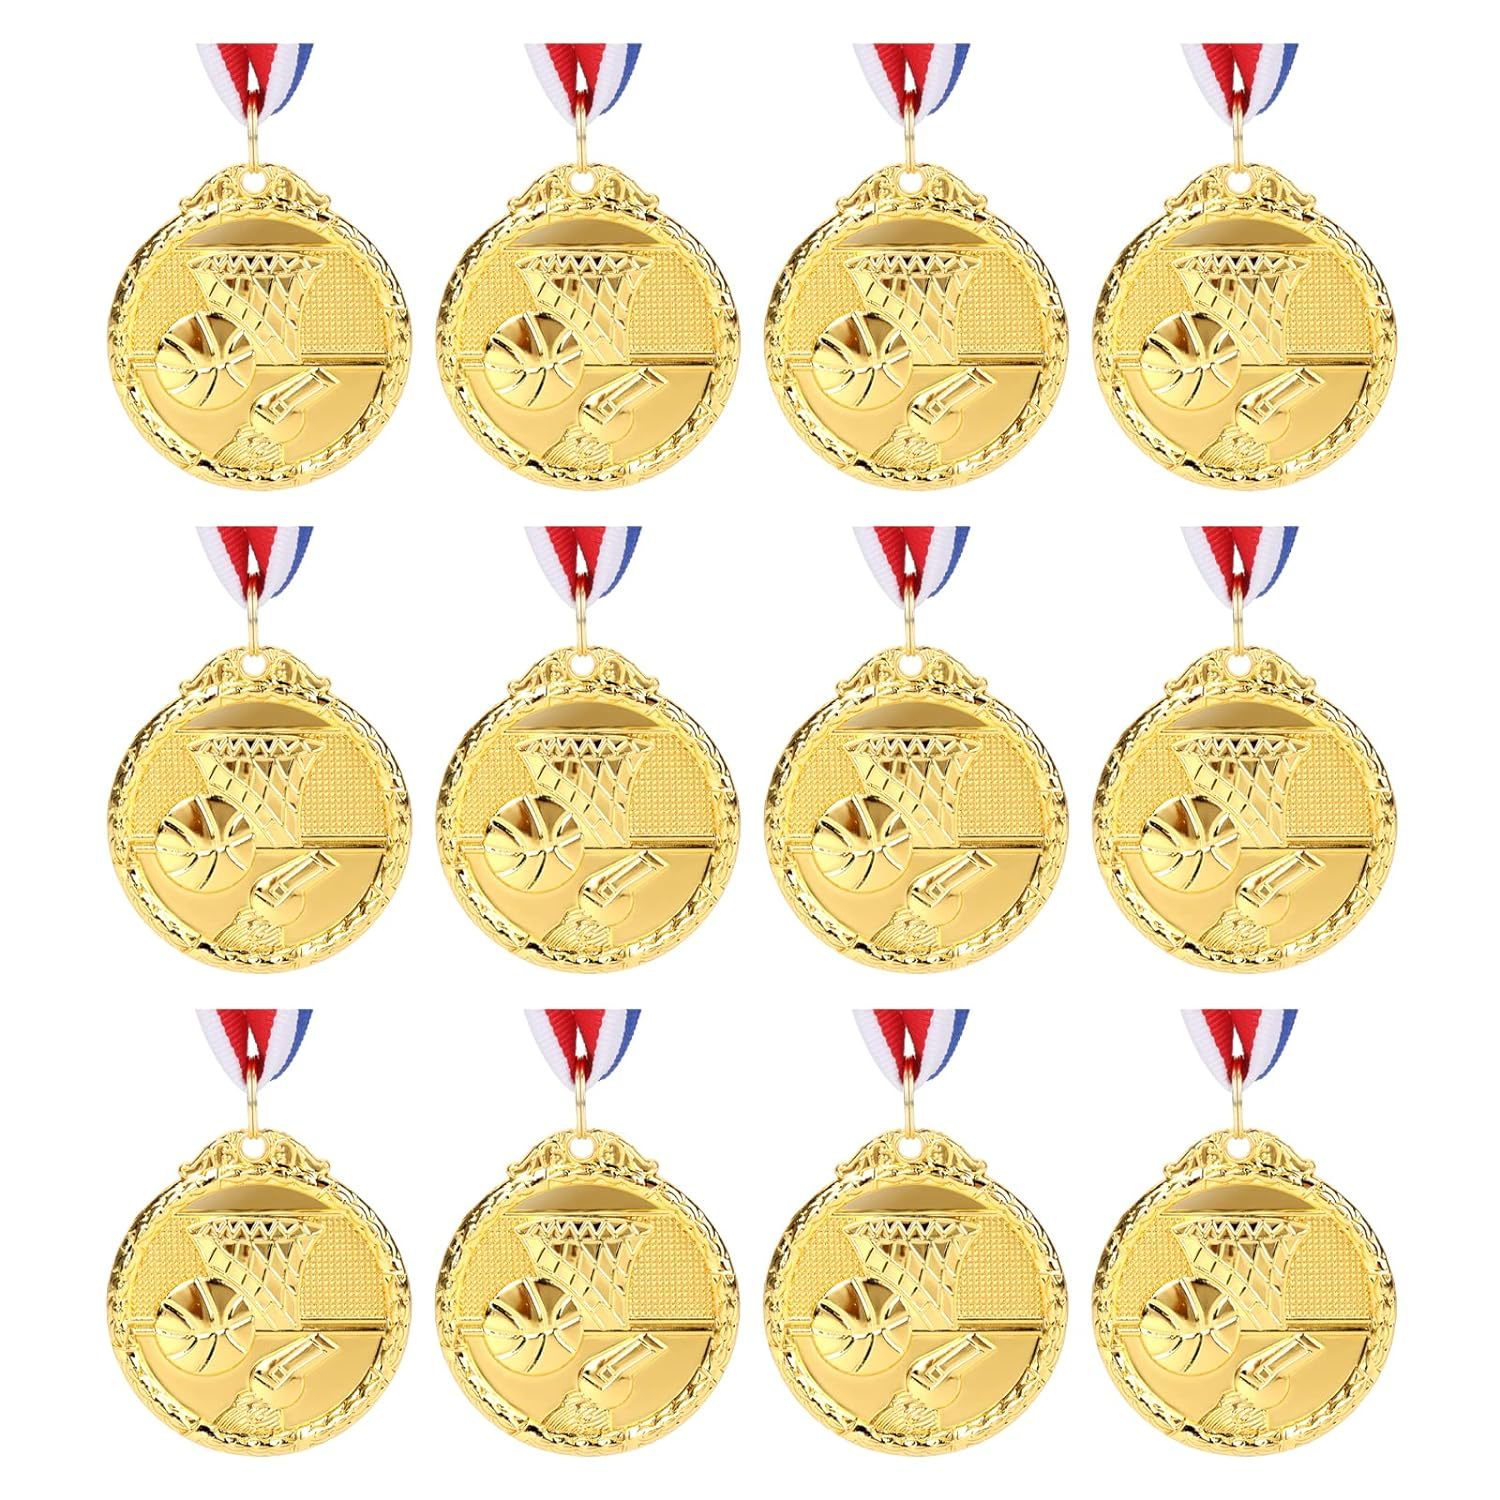 12 Pieces Gold Basketball Medals Set, Metal Medals For KidS Sports Basketball Ga - $27.99